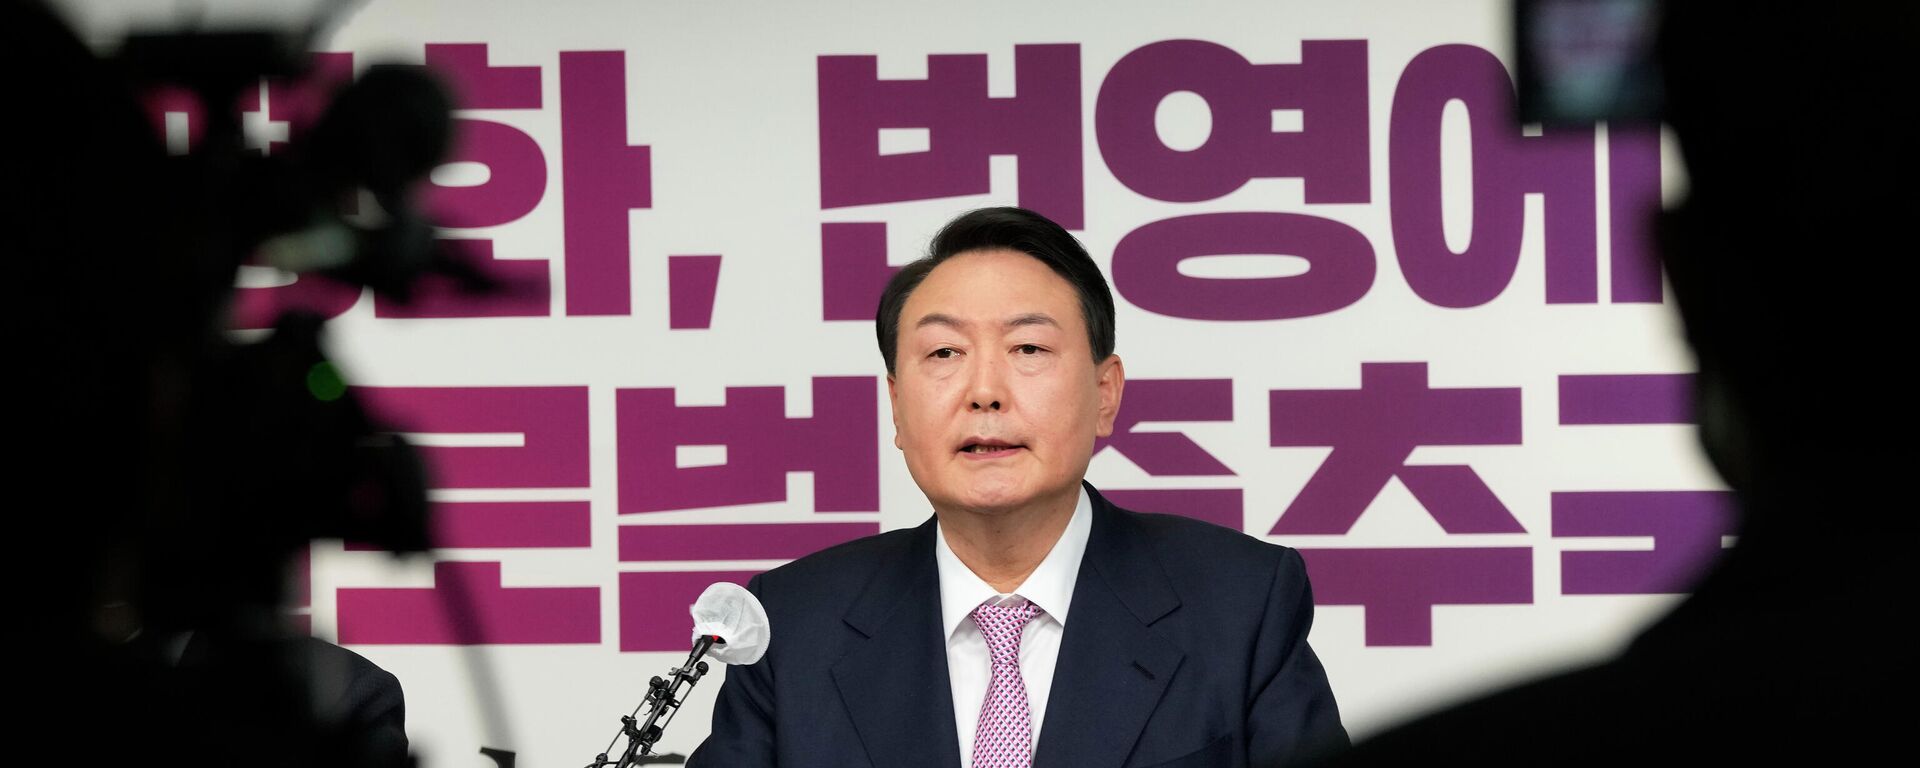 Yoon Suk Yeol, the presidential candidate of the main opposition People Power Party, speaks during a press conference at the party's headquarters in Seoul, South Korea Monday, Jan. 24, 2022. - Sputnik International, 1920, 02.01.2023